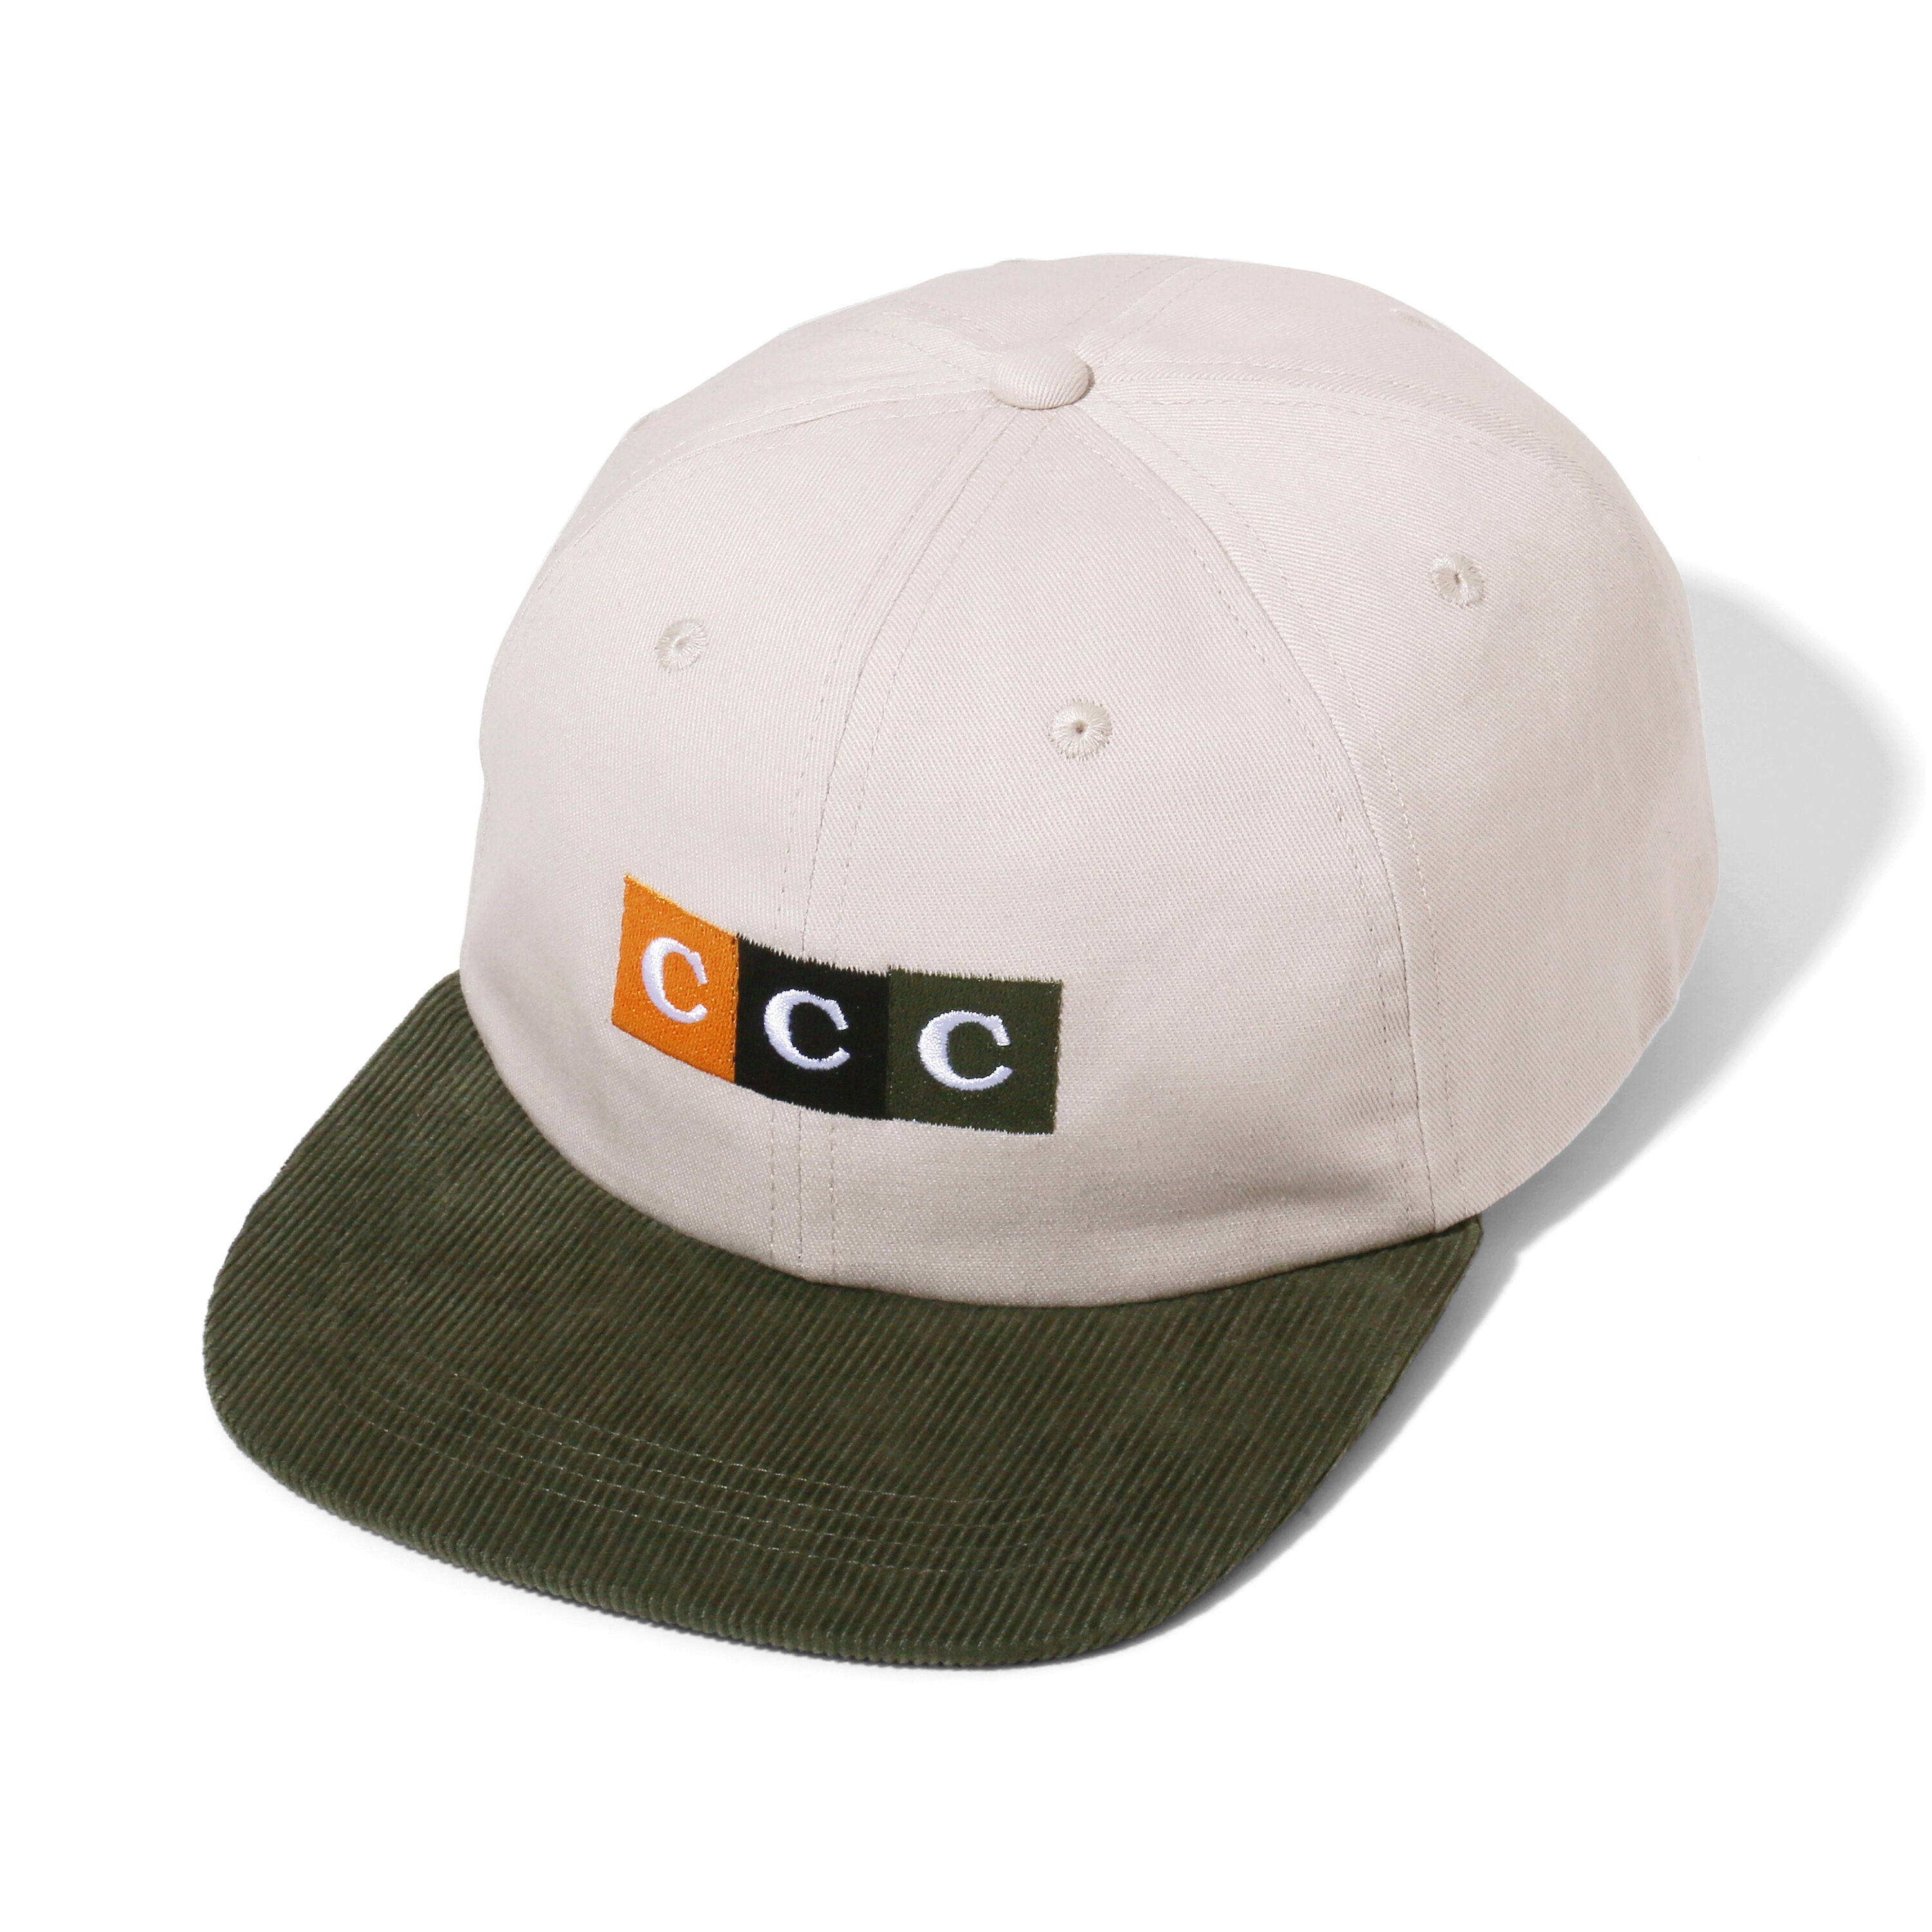 CITY COUNTRY CITY EMBROIDERED LOGO CAP – unexpected store